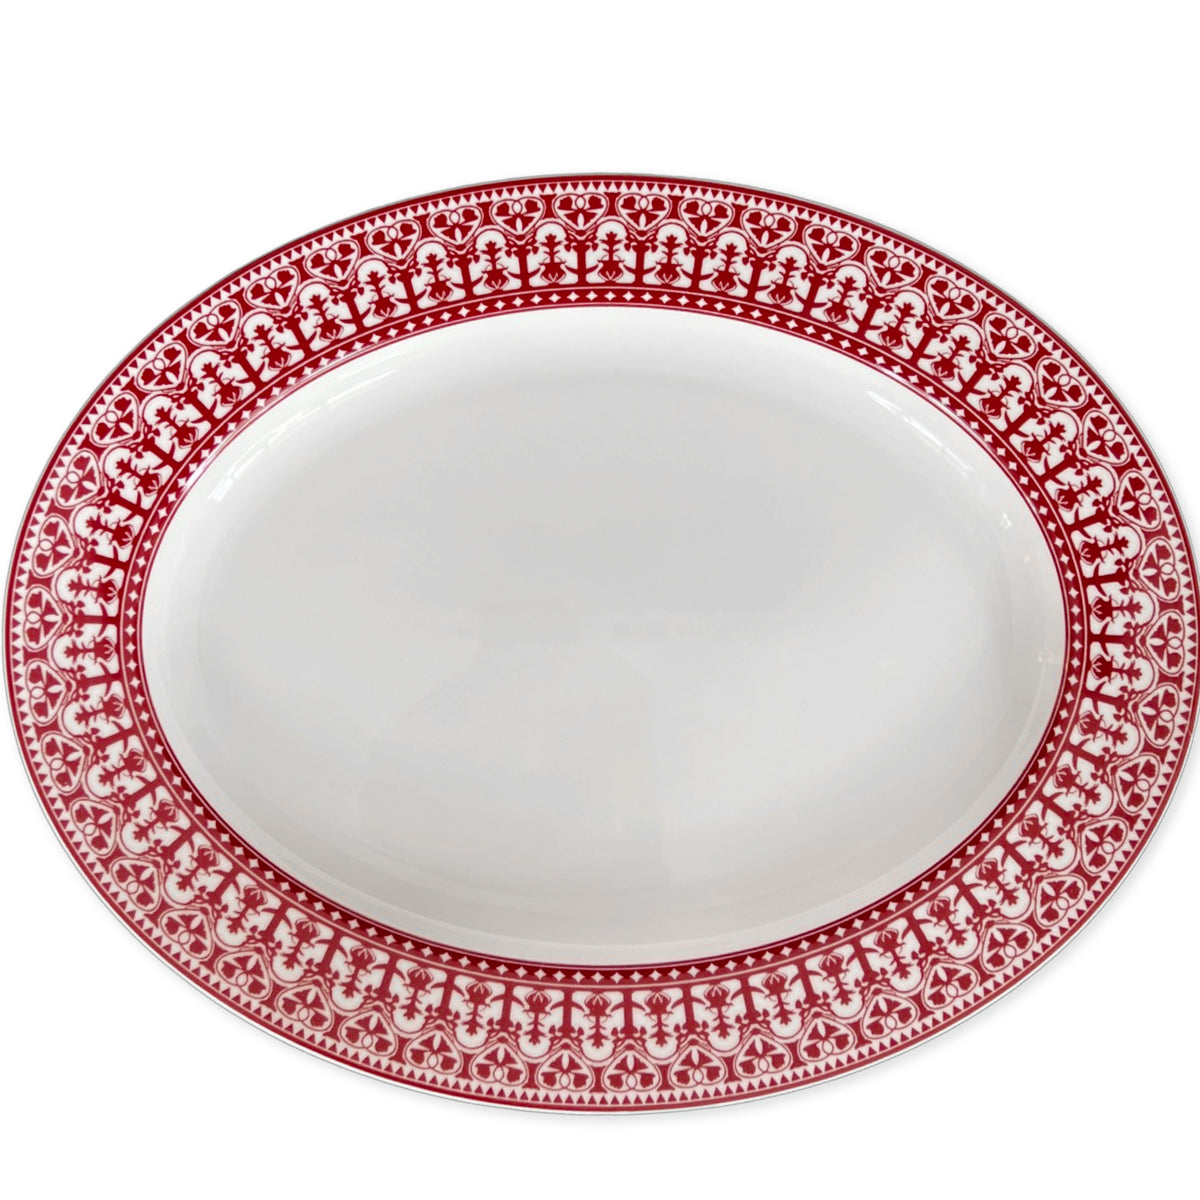 An empty white Casablanca Crimson Oval Rimmed Platter by Caskata Artisanal Home featuring an intricate red decorative border pattern, perfect for adding a touch of elegance to your dinnerware collection.